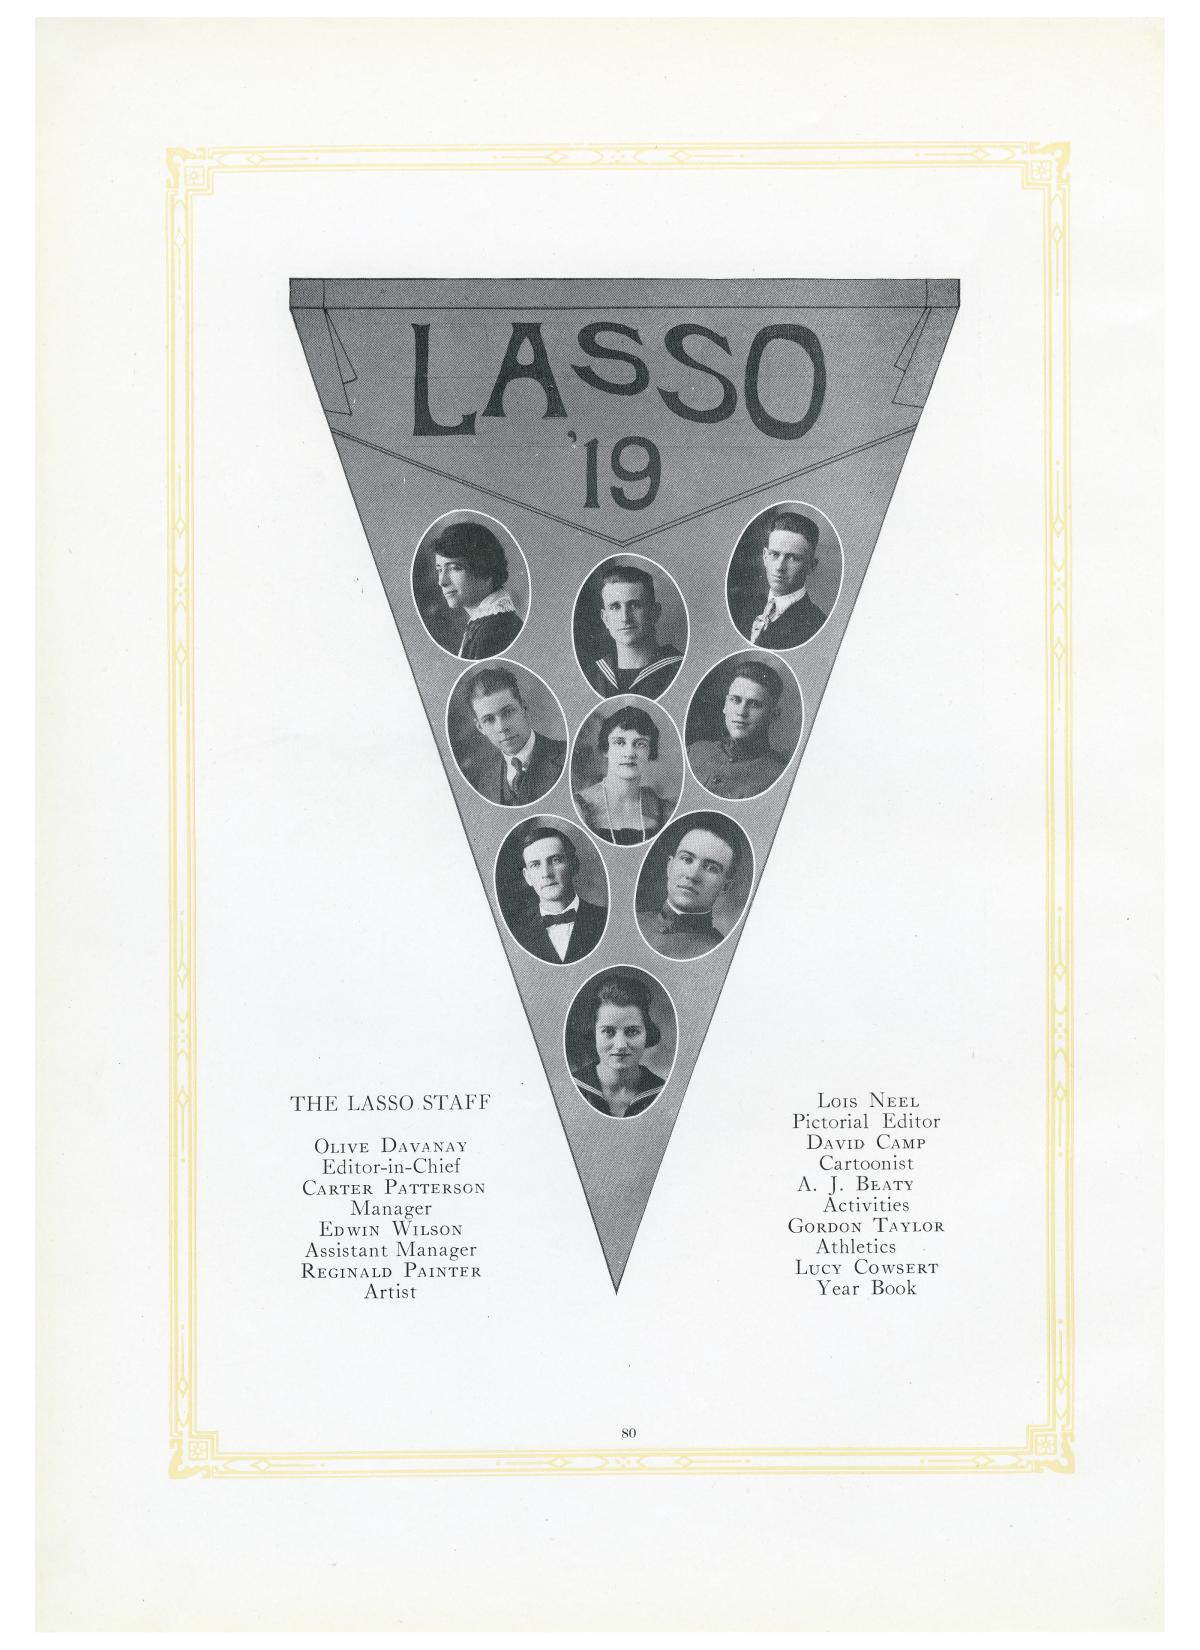 The Lasso, Yearbook of Howard Payne College, 1919
                                                
                                                    80
                                                